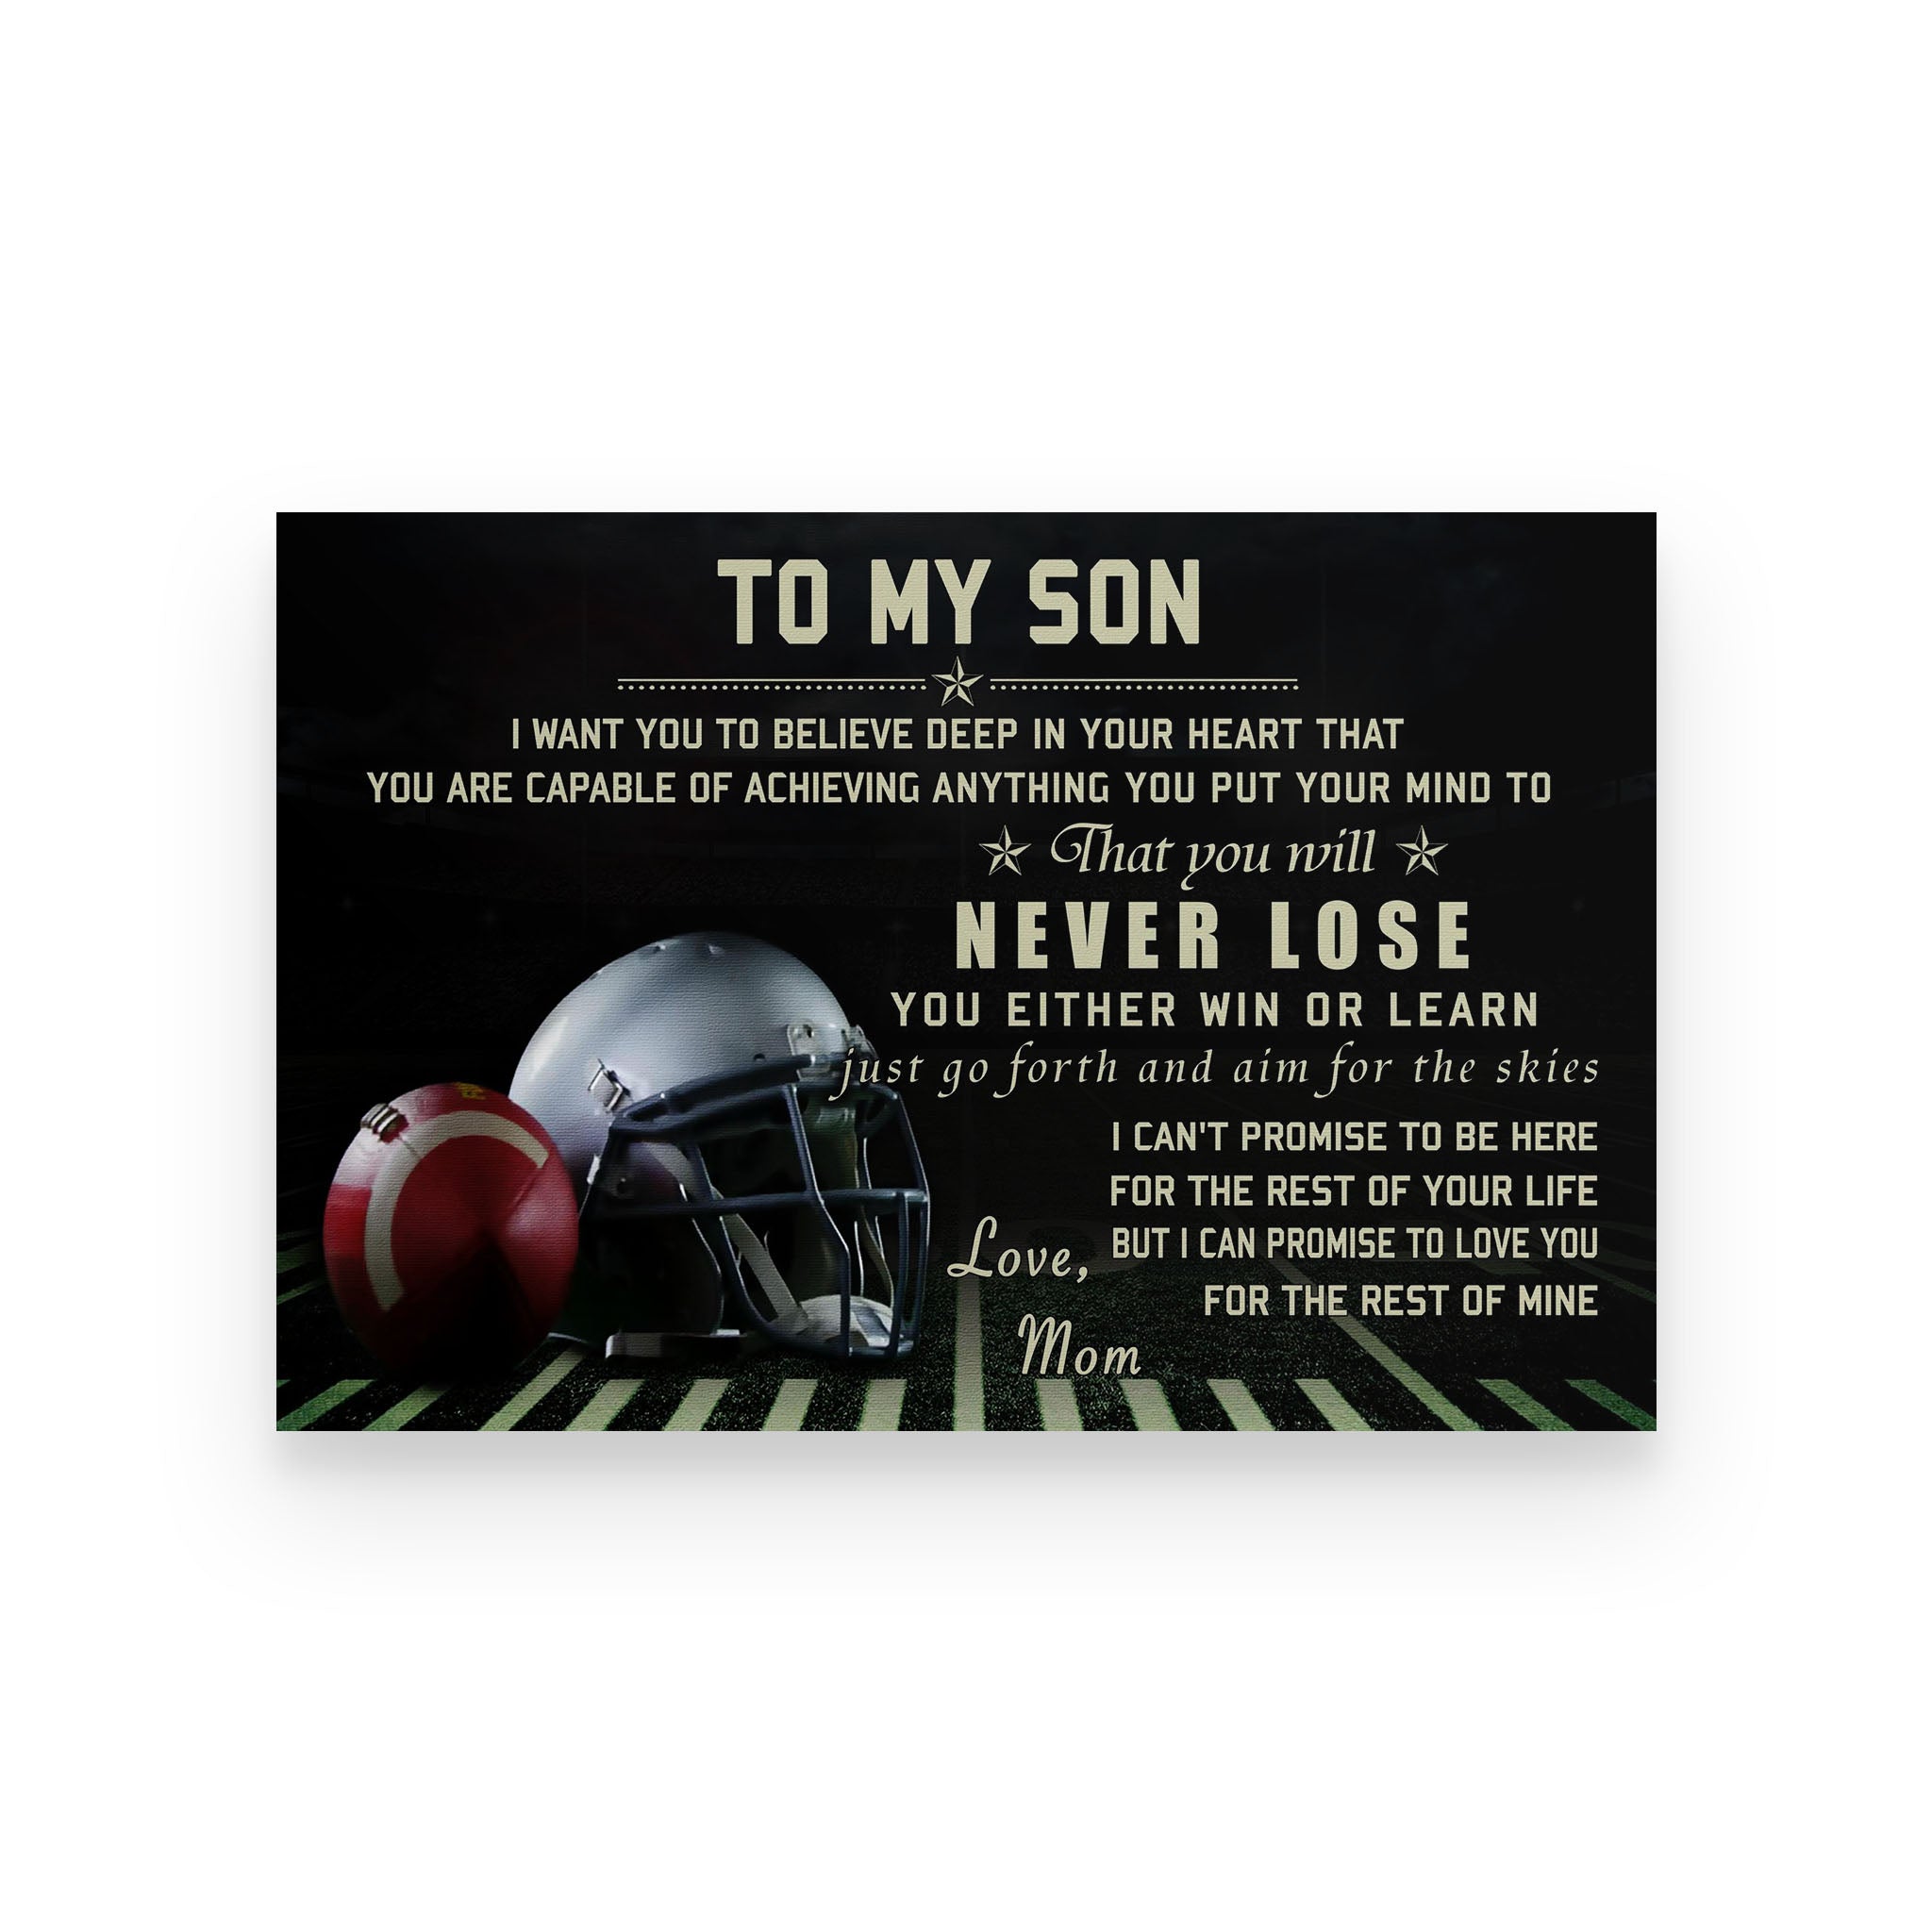 American football poster mom to son I want you to believe deep in your heart vs7